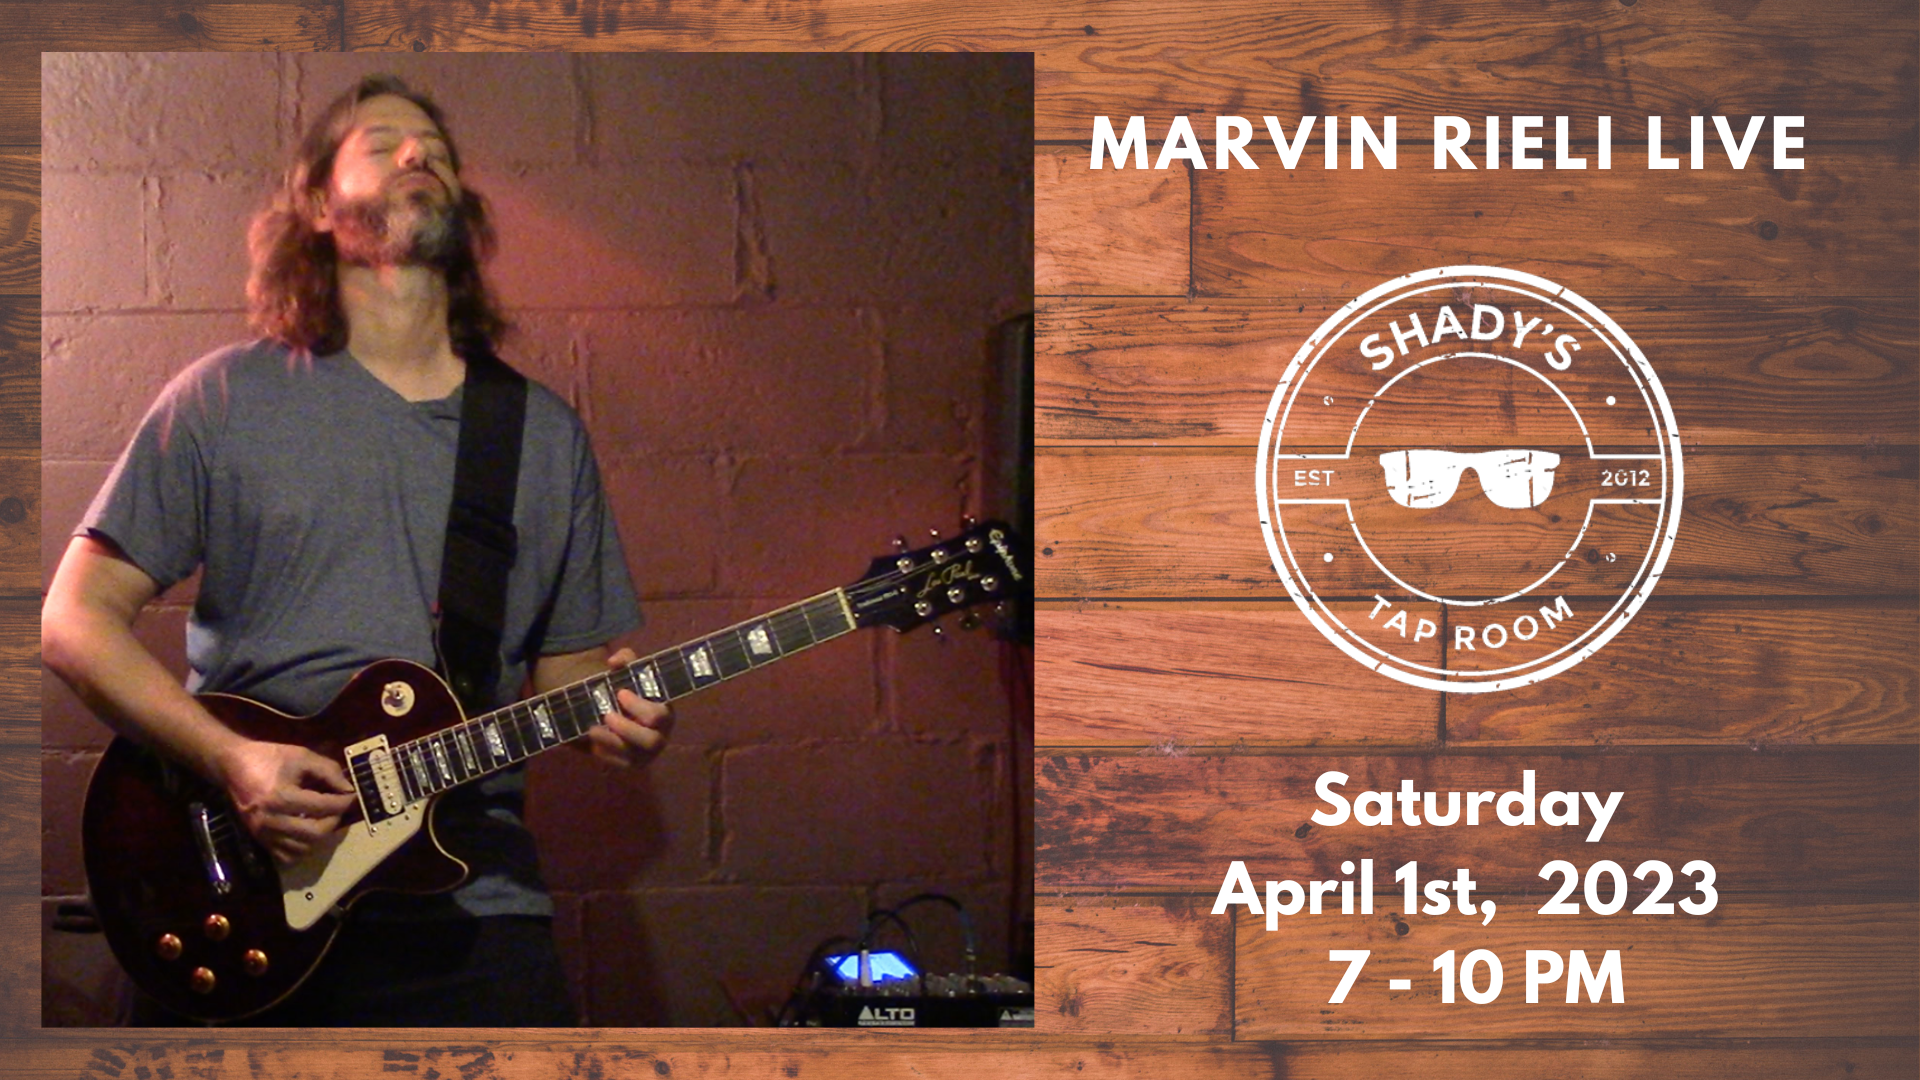 Marvin Rieli April 2023 at Shady's Tap Room